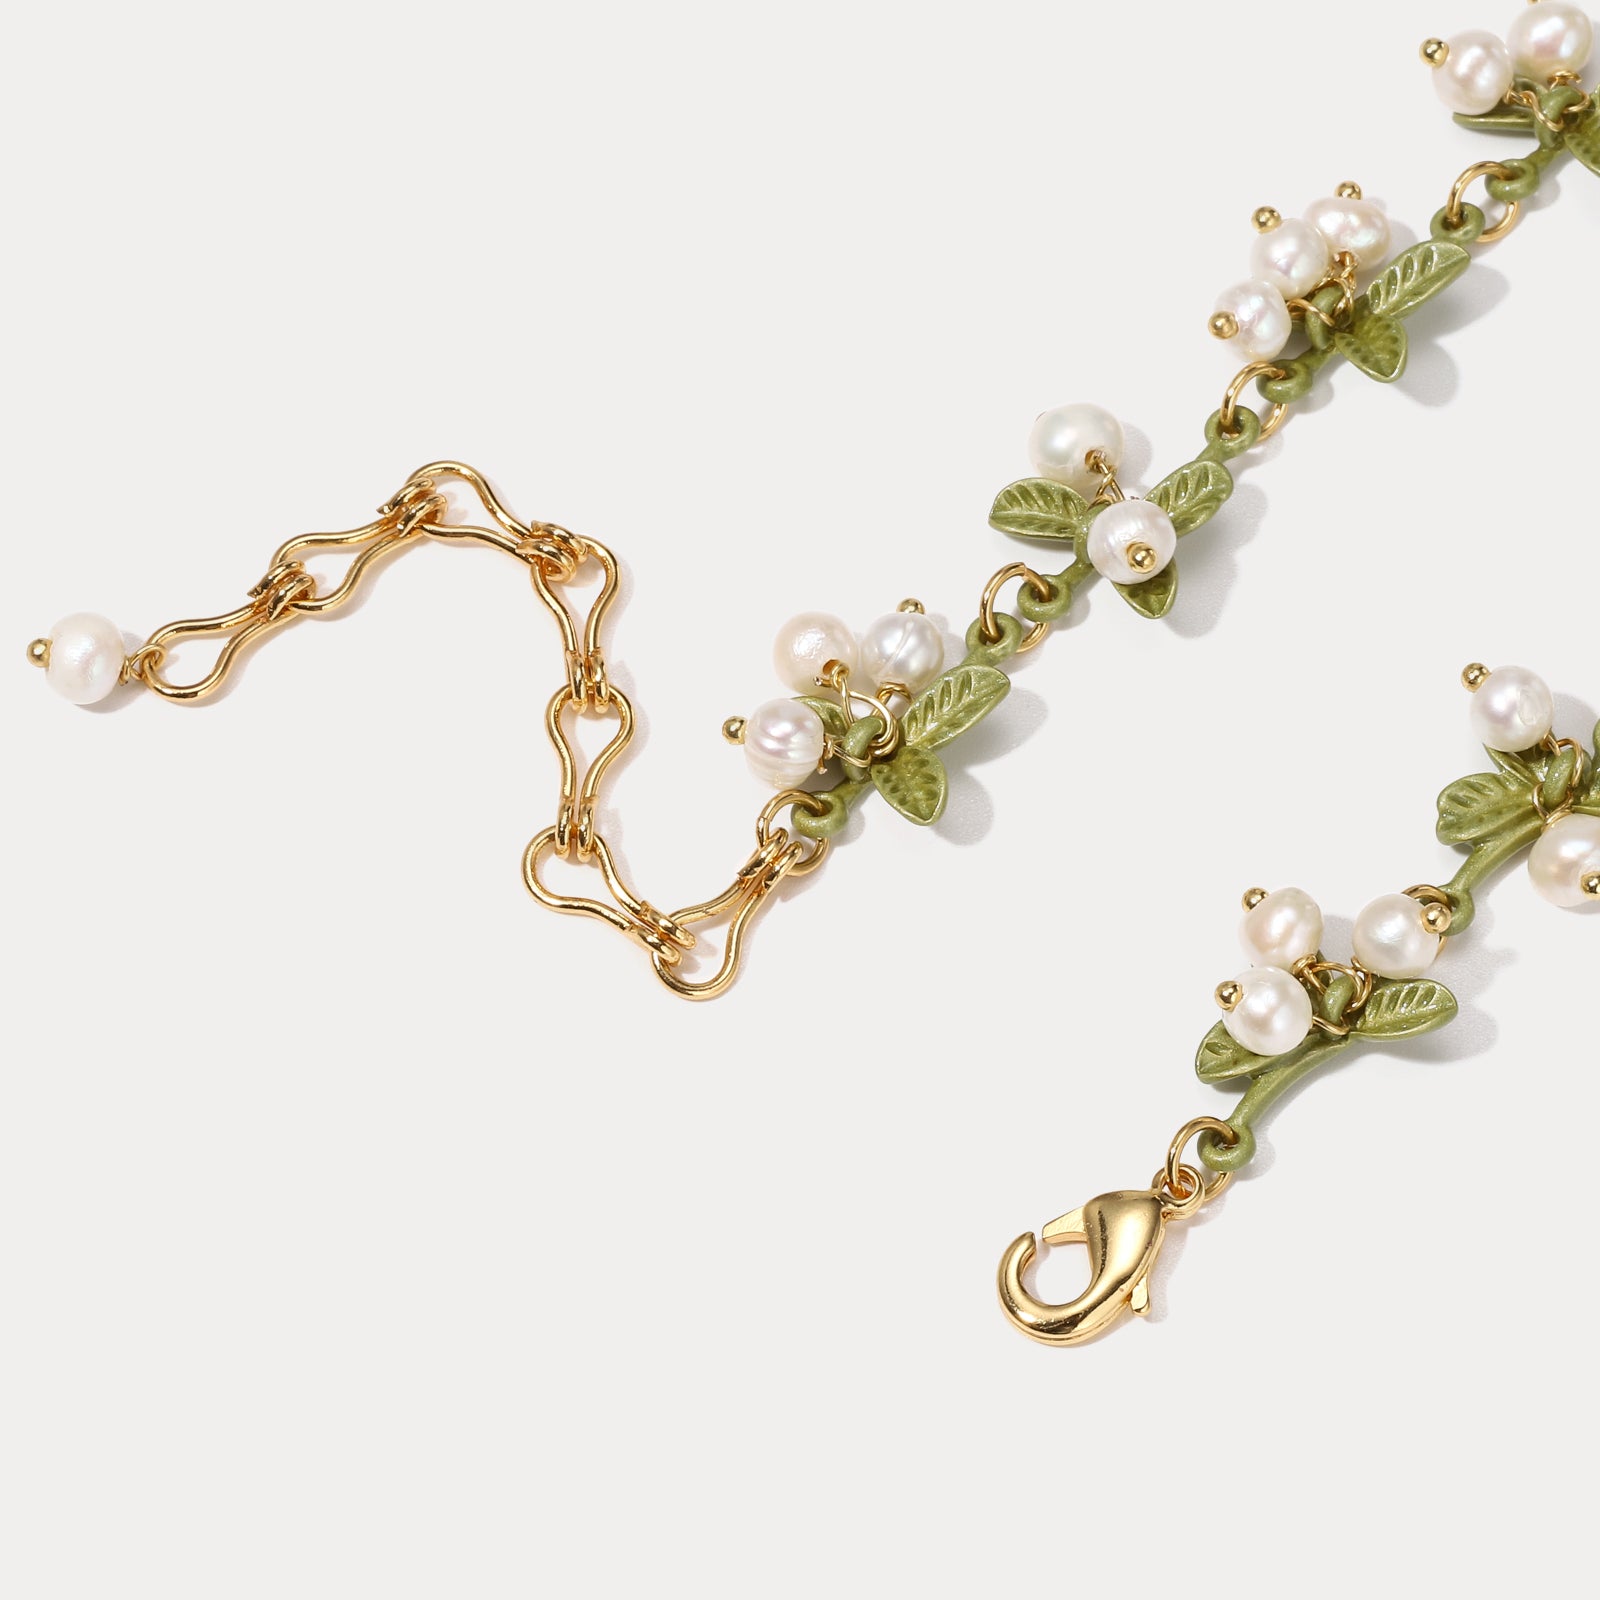 Vintage Lily Of The Valley Choker